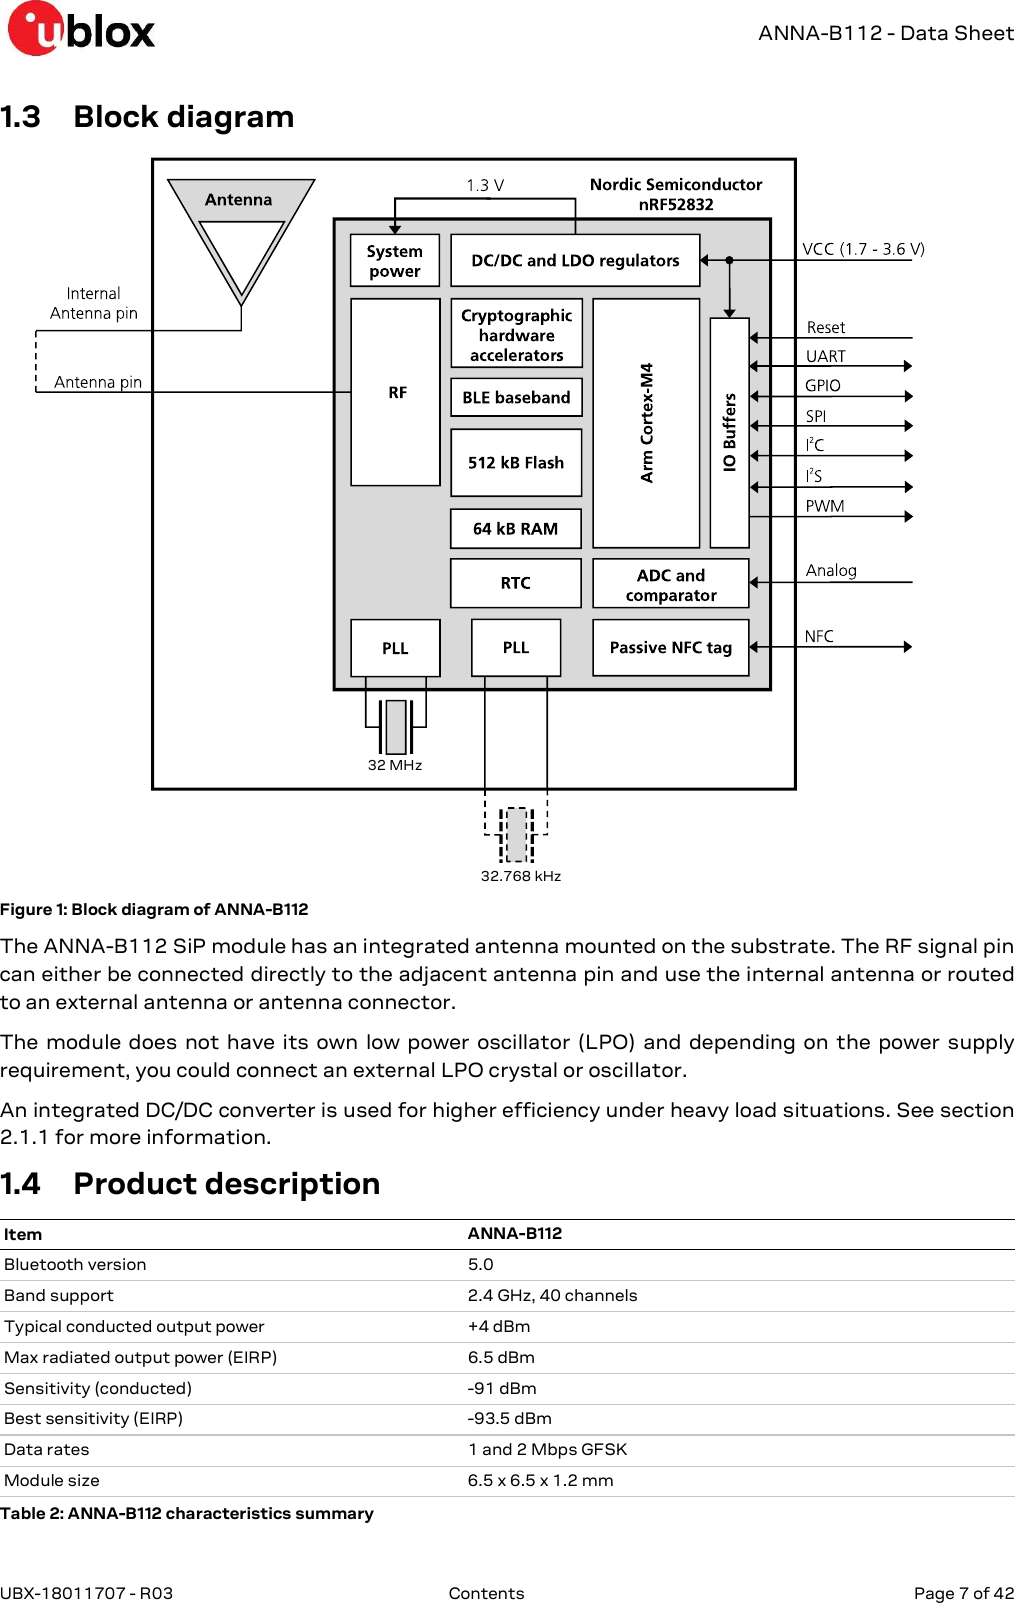   ANNA-B112 - Data Sheet UBX-18011707 - R03  Contents   Page 7 of 42      1.3 Block diagram  Figure 1: Block diagram of ANNA-B112 The ANNA-B112 SiP module has an integrated antenna mounted on the substrate. The RF signal pin can either be connected directly to the adjacent antenna pin and use the internal antenna or routed to an external antenna or antenna connector. The module  does  not have  its own  low  power  oscillator  (LPO)  and  depending  on the  power supply requirement, you could connect an external LPO crystal or oscillator.  An integrated DC/DC converter is used for higher efficiency under heavy load situations. See section 2.1.1 for more information. 1.4 Product description Item ANNA-B112 Bluetooth version  5.0 Band support  2.4 GHz, 40 channels Typical conducted output power  +4 dBm Max radiated output power (EIRP)  6.5 dBm Sensitivity (conducted)  -91 dBm Best sensitivity (EIRP)  -93.5 dBm Data rates  1 and 2 Mbps GFSK Module size  6.5 x 6.5 x 1.2 mm Table 2: ANNA-B112 characteristics summary        32 MHz                 32.768 kHz     